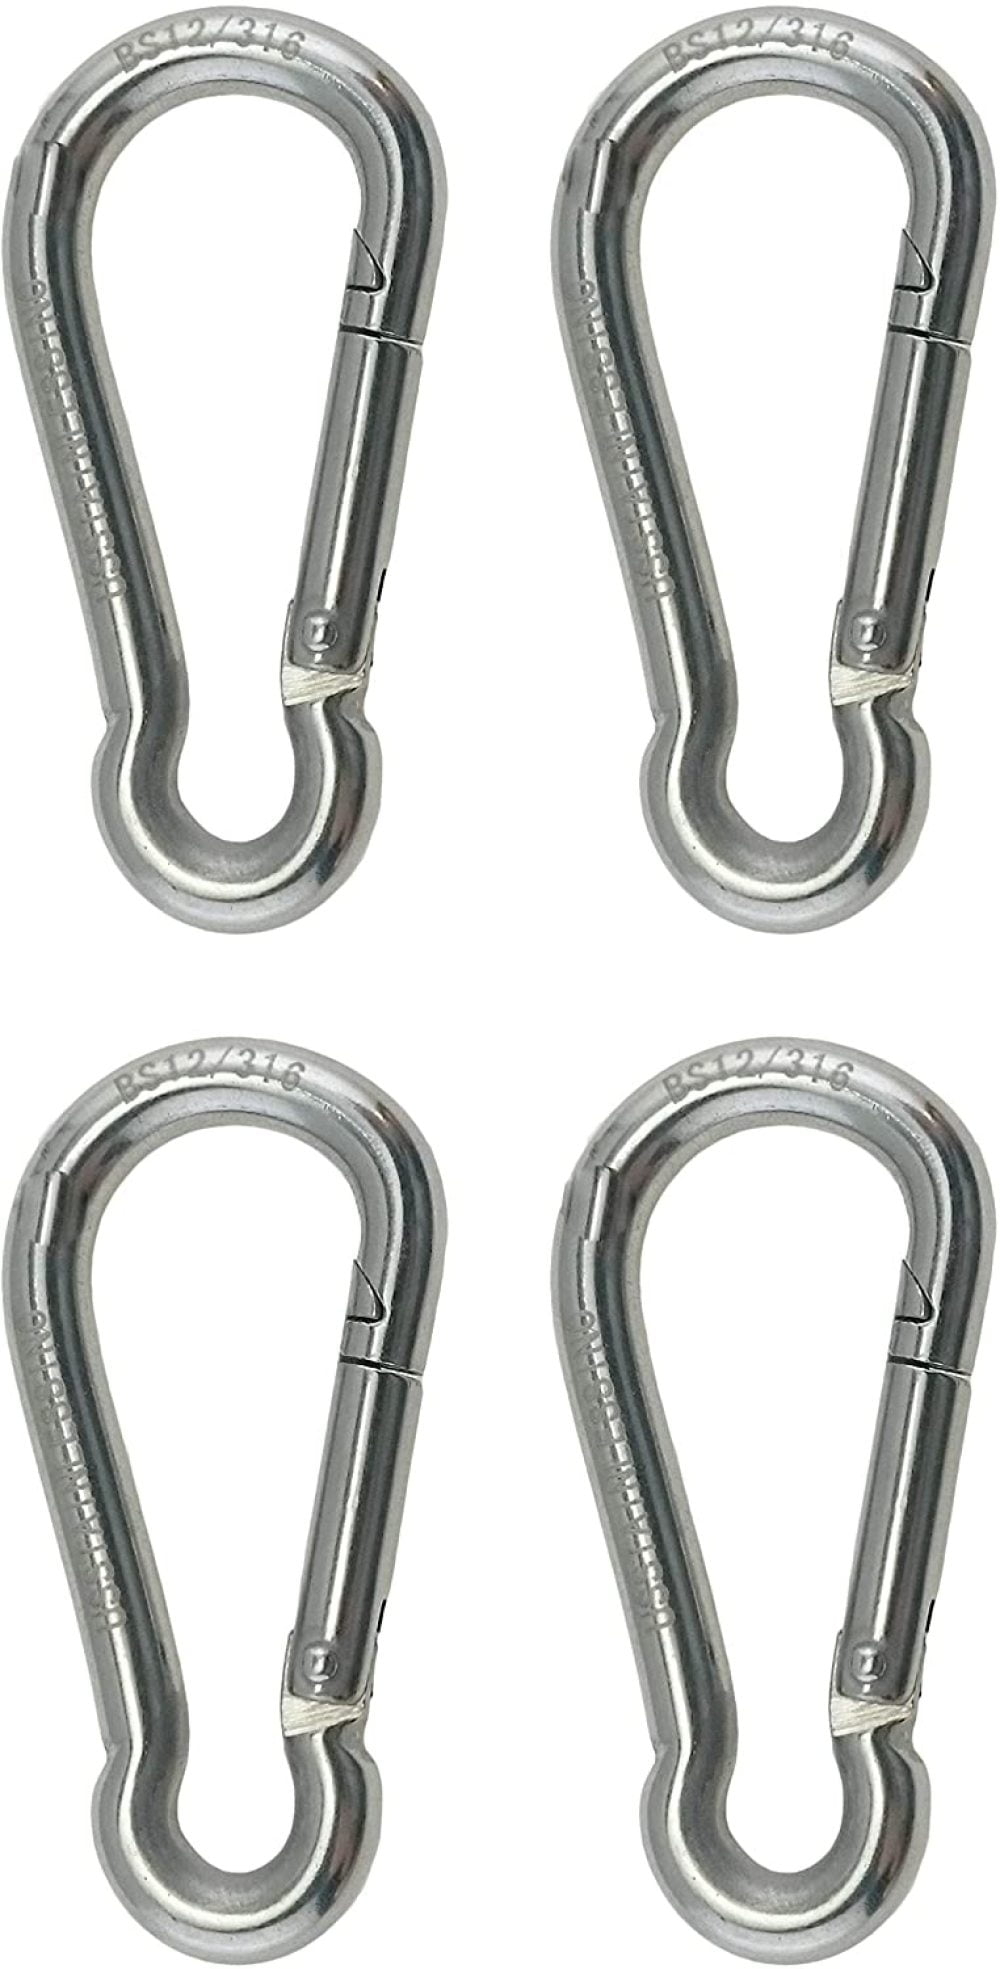 10mm 4 Pieces Stainless Steel 316 Spring Hook with Eyelet Carabiner 3/8 Marine Grade 